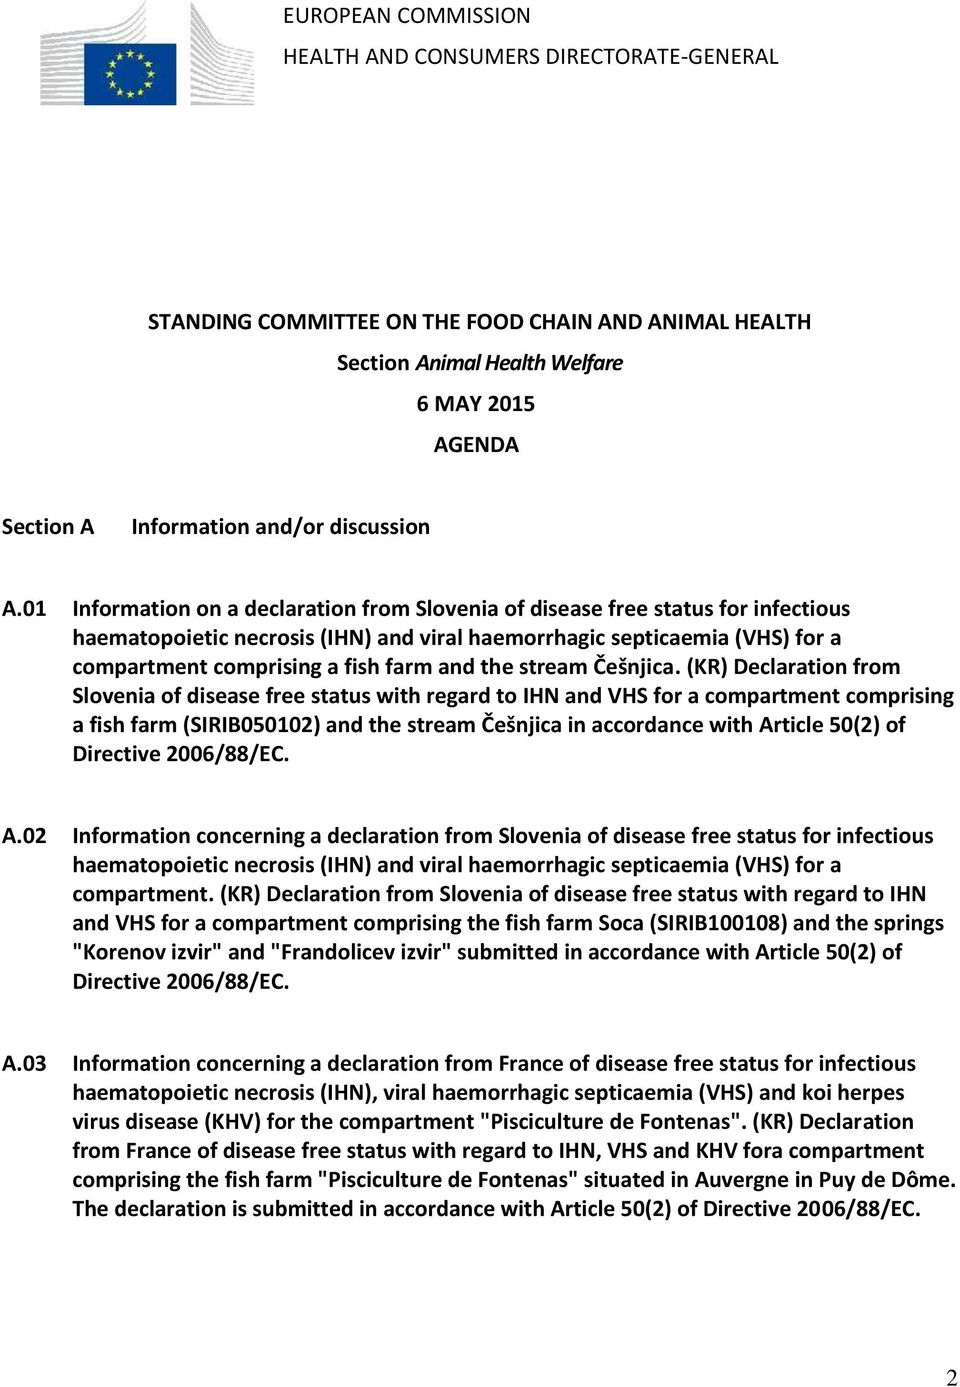 01 Information on a declaration from Slovenia of disease free status for infectious haematopoietic necrosis (IHN) and viral haemorrhagic septicaemia (VHS) for a compartment comprising a fish farm and